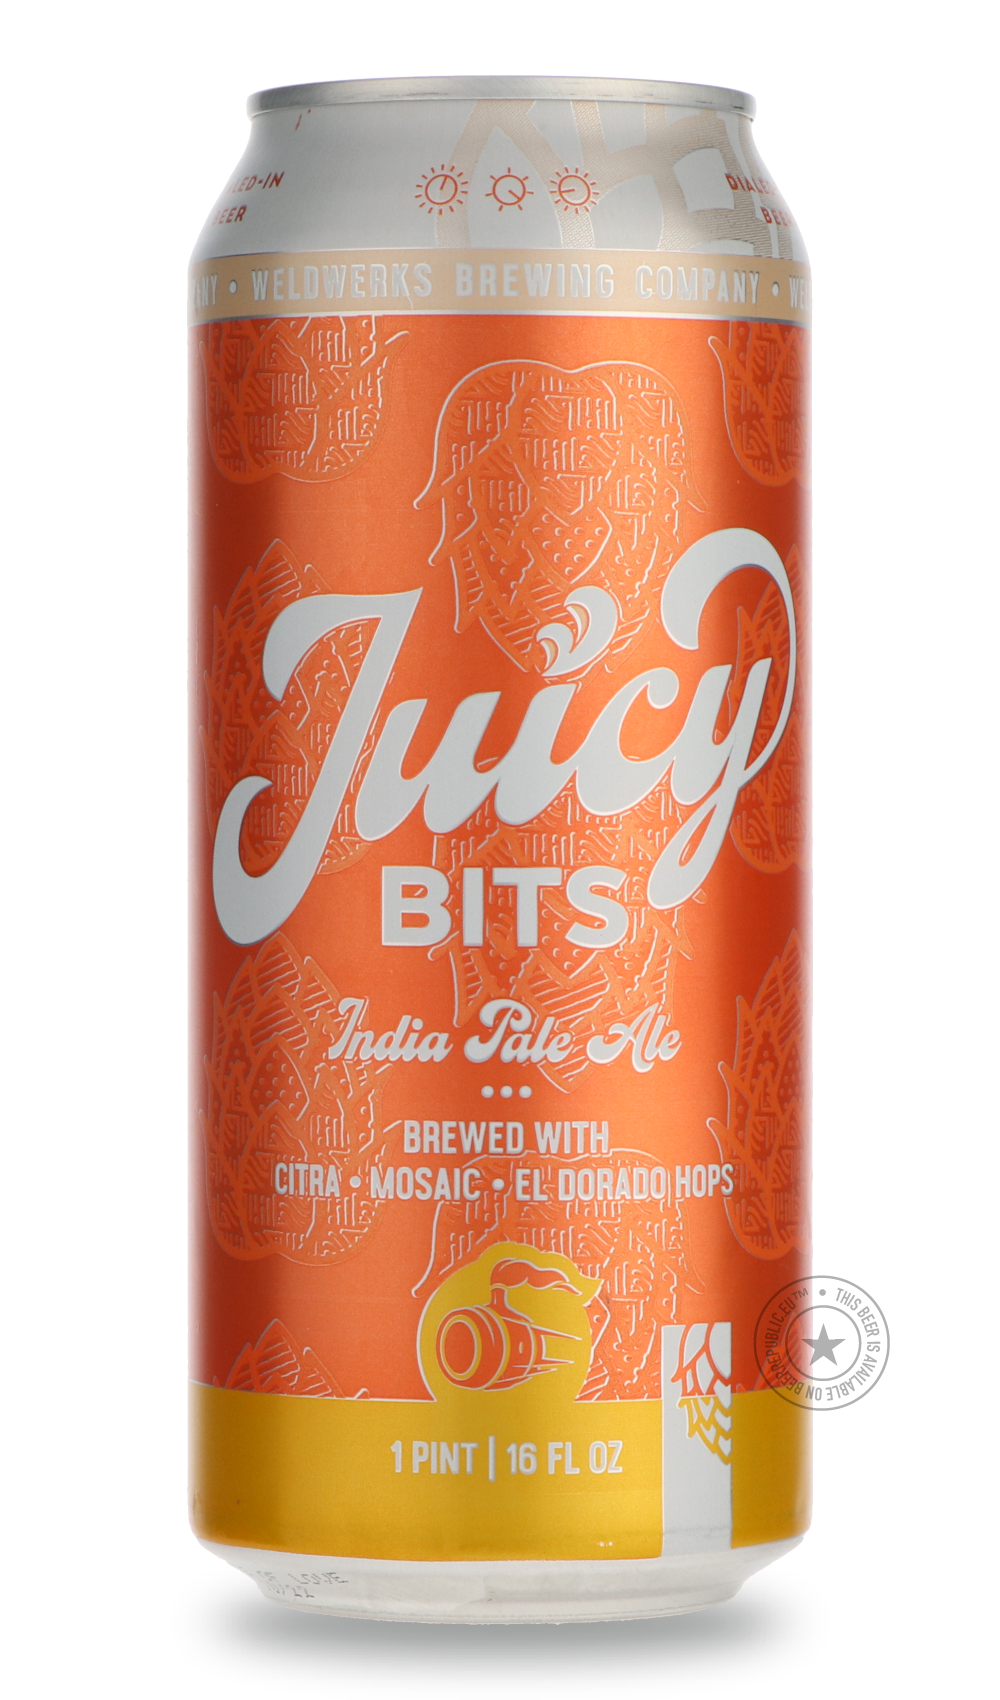 -WeldWerks- Juicy Bits-IPA- Only @ Beer Republic - The best online beer store for American & Canadian craft beer - Buy beer online from the USA and Canada - Bier online kopen - Amerikaans bier kopen - Craft beer store - Craft beer kopen - Amerikanisch bier kaufen - Bier online kaufen - Acheter biere online - IPA - Stout - Porter - New England IPA - Hazy IPA - Imperial Stout - Barrel Aged - Barrel Aged Imperial Stout - Brown - Dark beer - Blond - Blonde - Pilsner - Lager - Wheat - Weizen - Amber - Barley Win